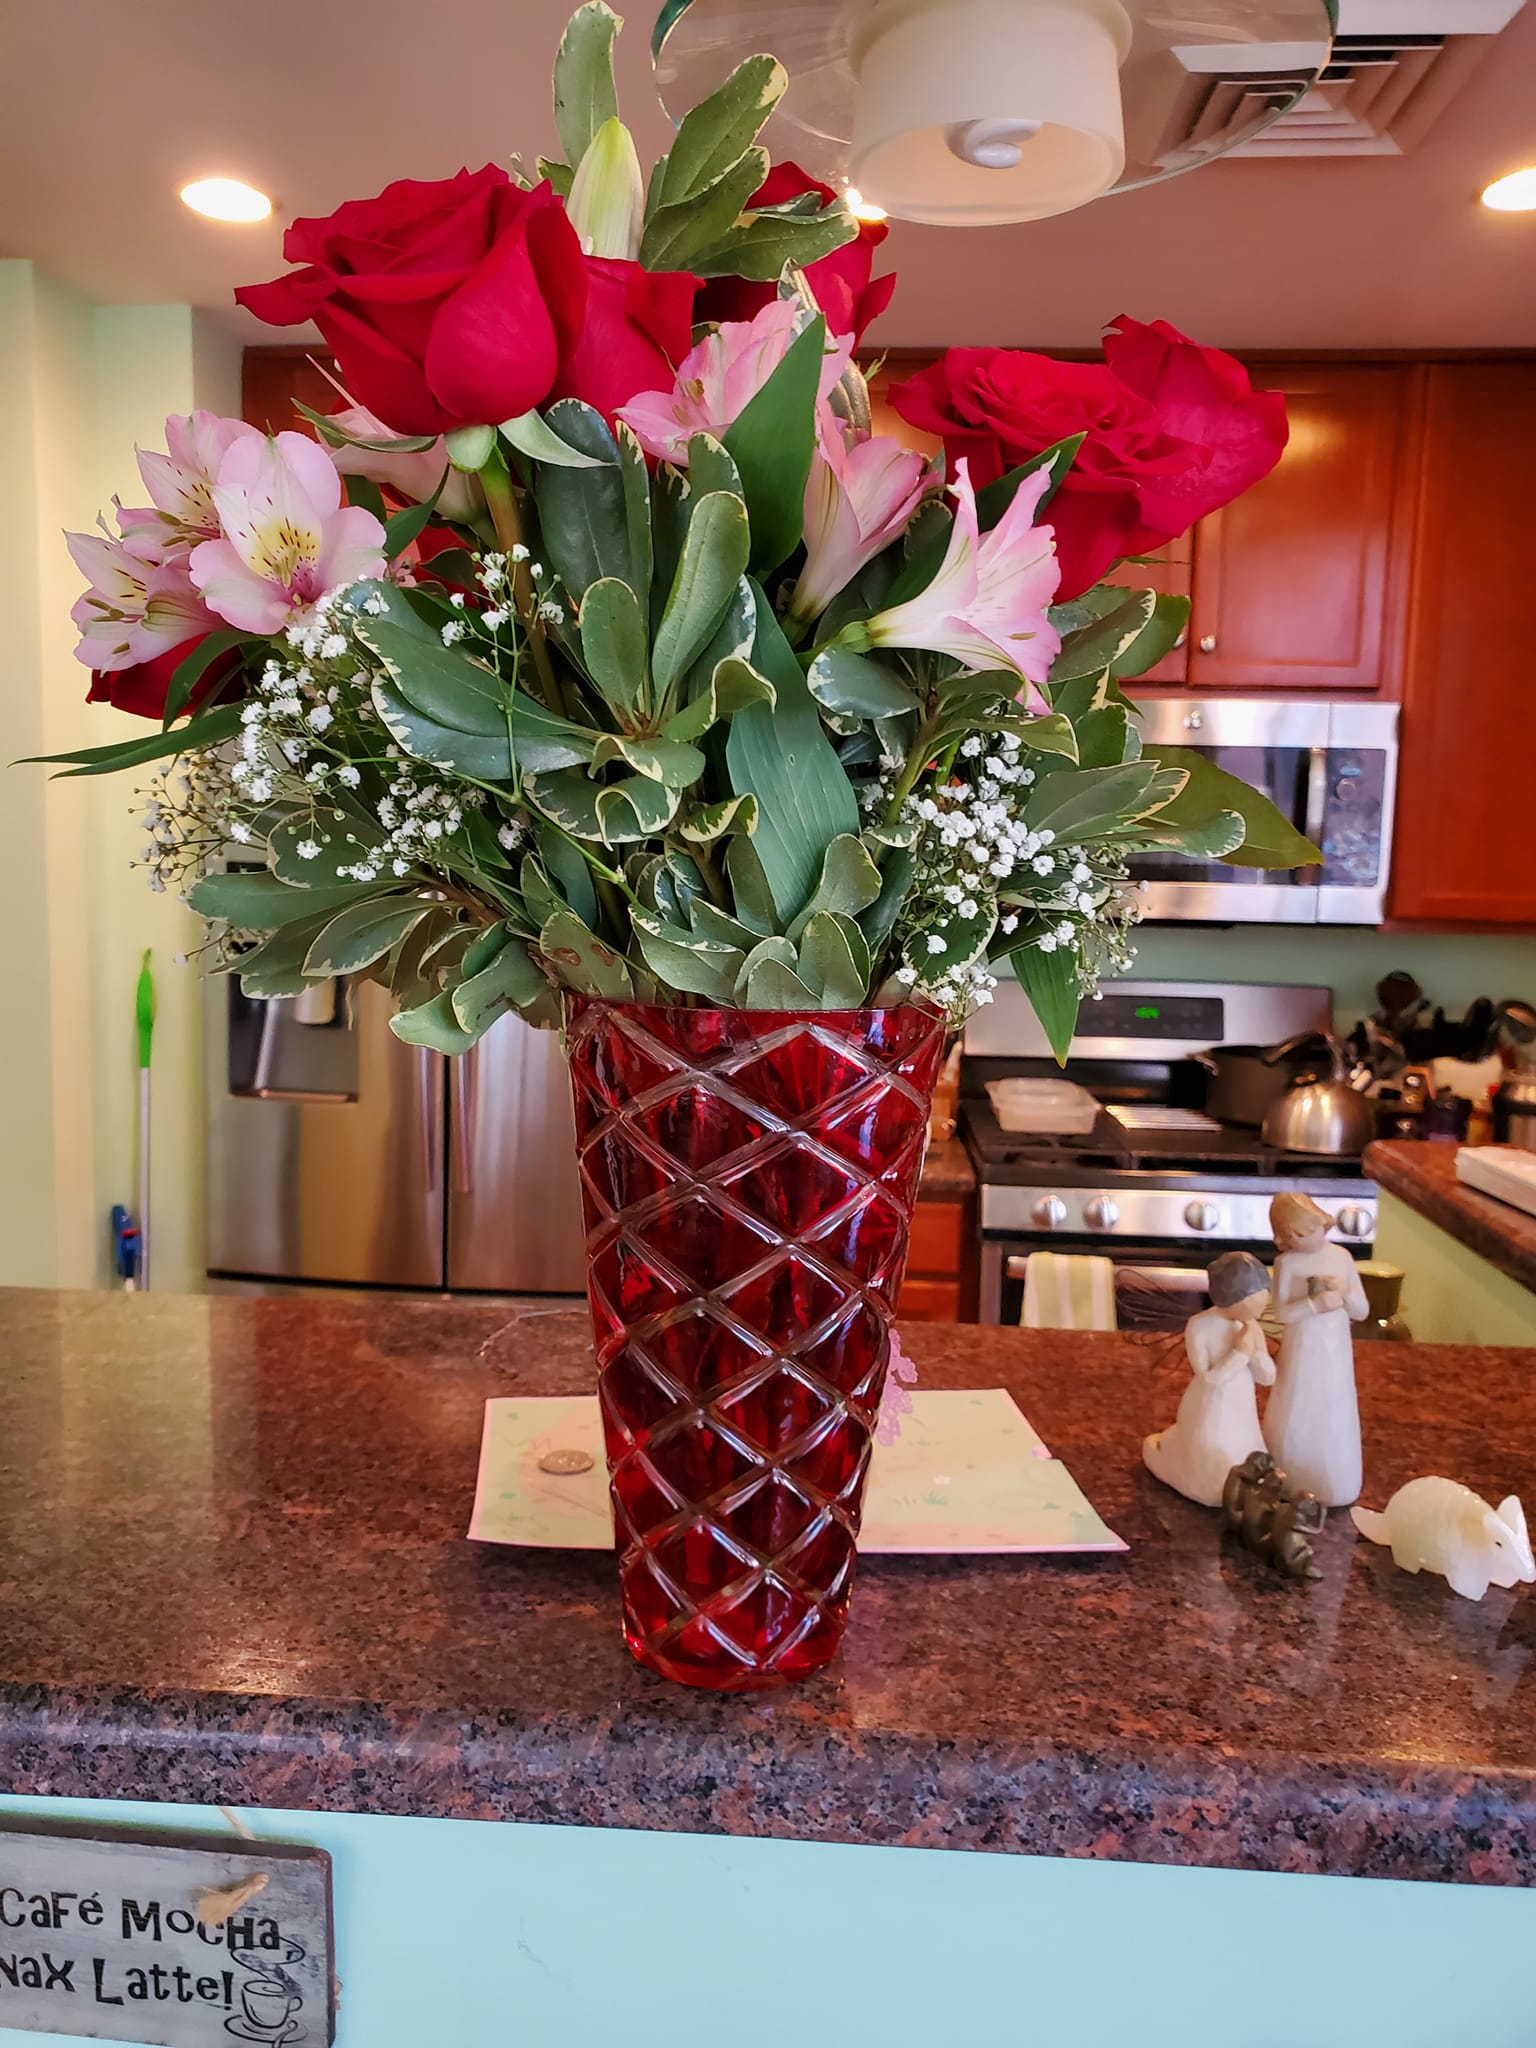 More fabulous flowers for Valentine’s Day from Sheri’s  brother and sister-in-law, 2-22.